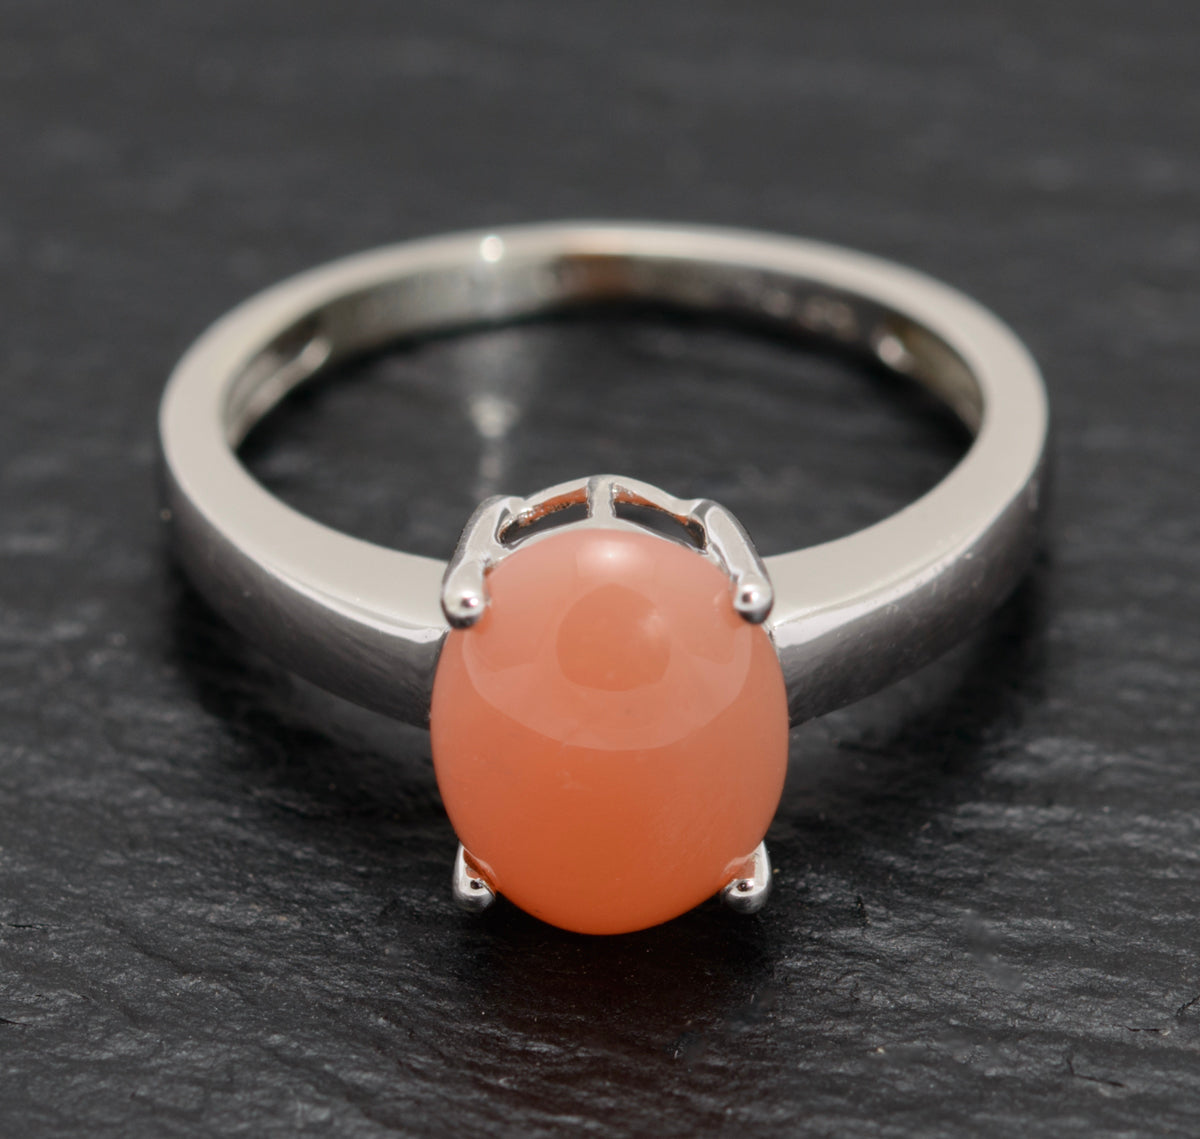 White Gold Solitaire Ring With Peach Moonstone Cabochon Birmingham 2005 QVC (A1573)